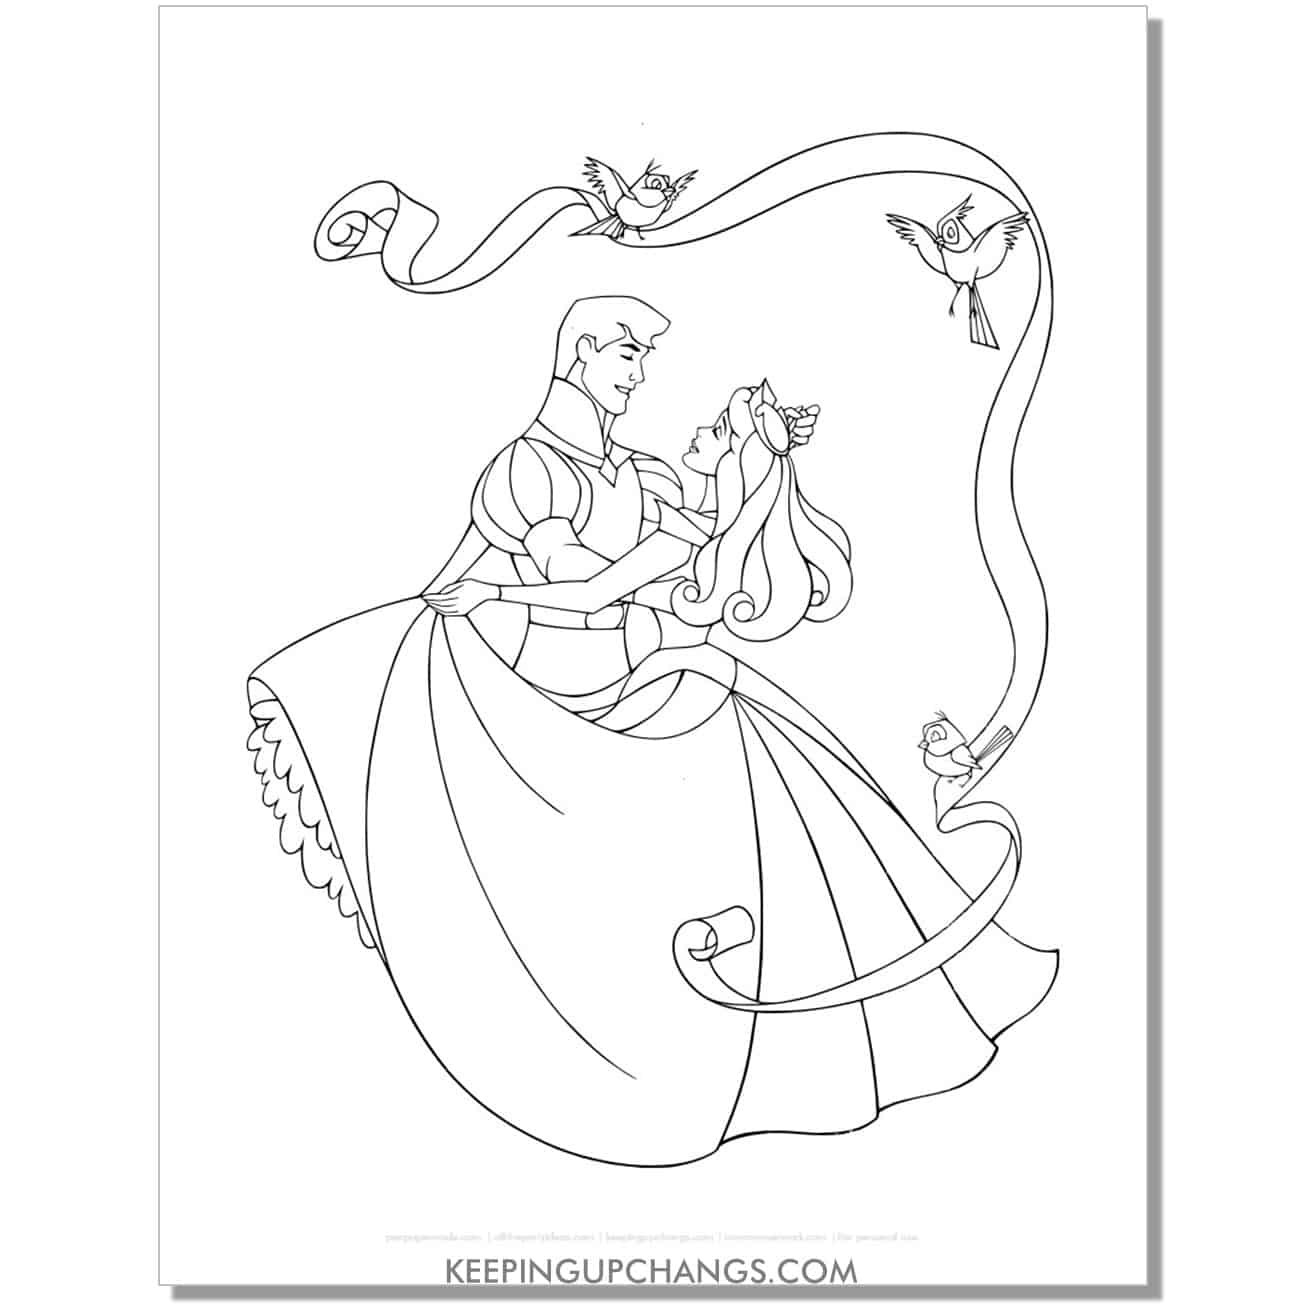 free sleeping beauty princess with prince phillip coloring page, sheet.